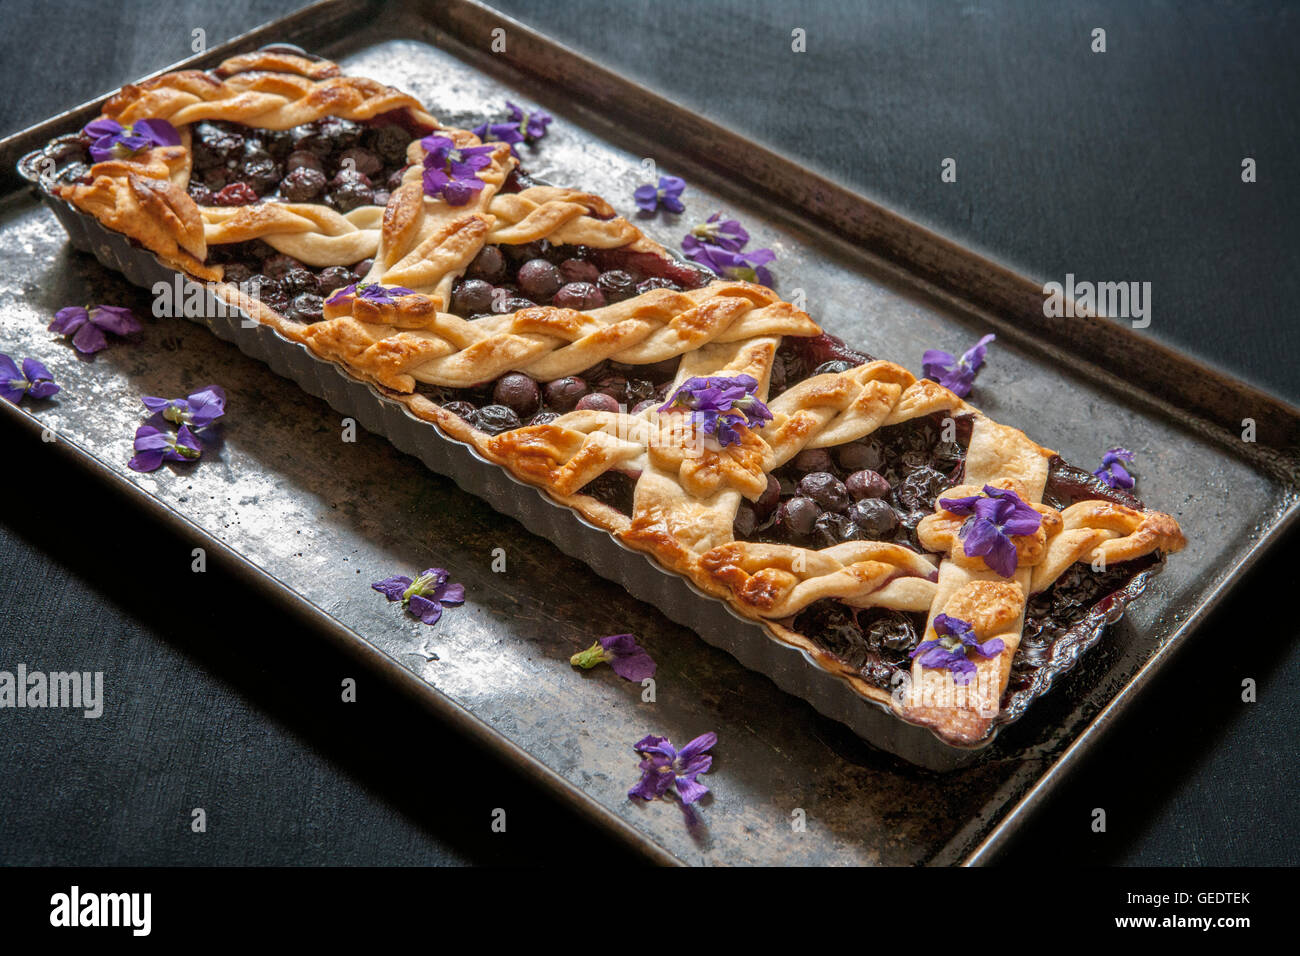 Baked Blueberry Tart with Edible Flowers Stock Photo